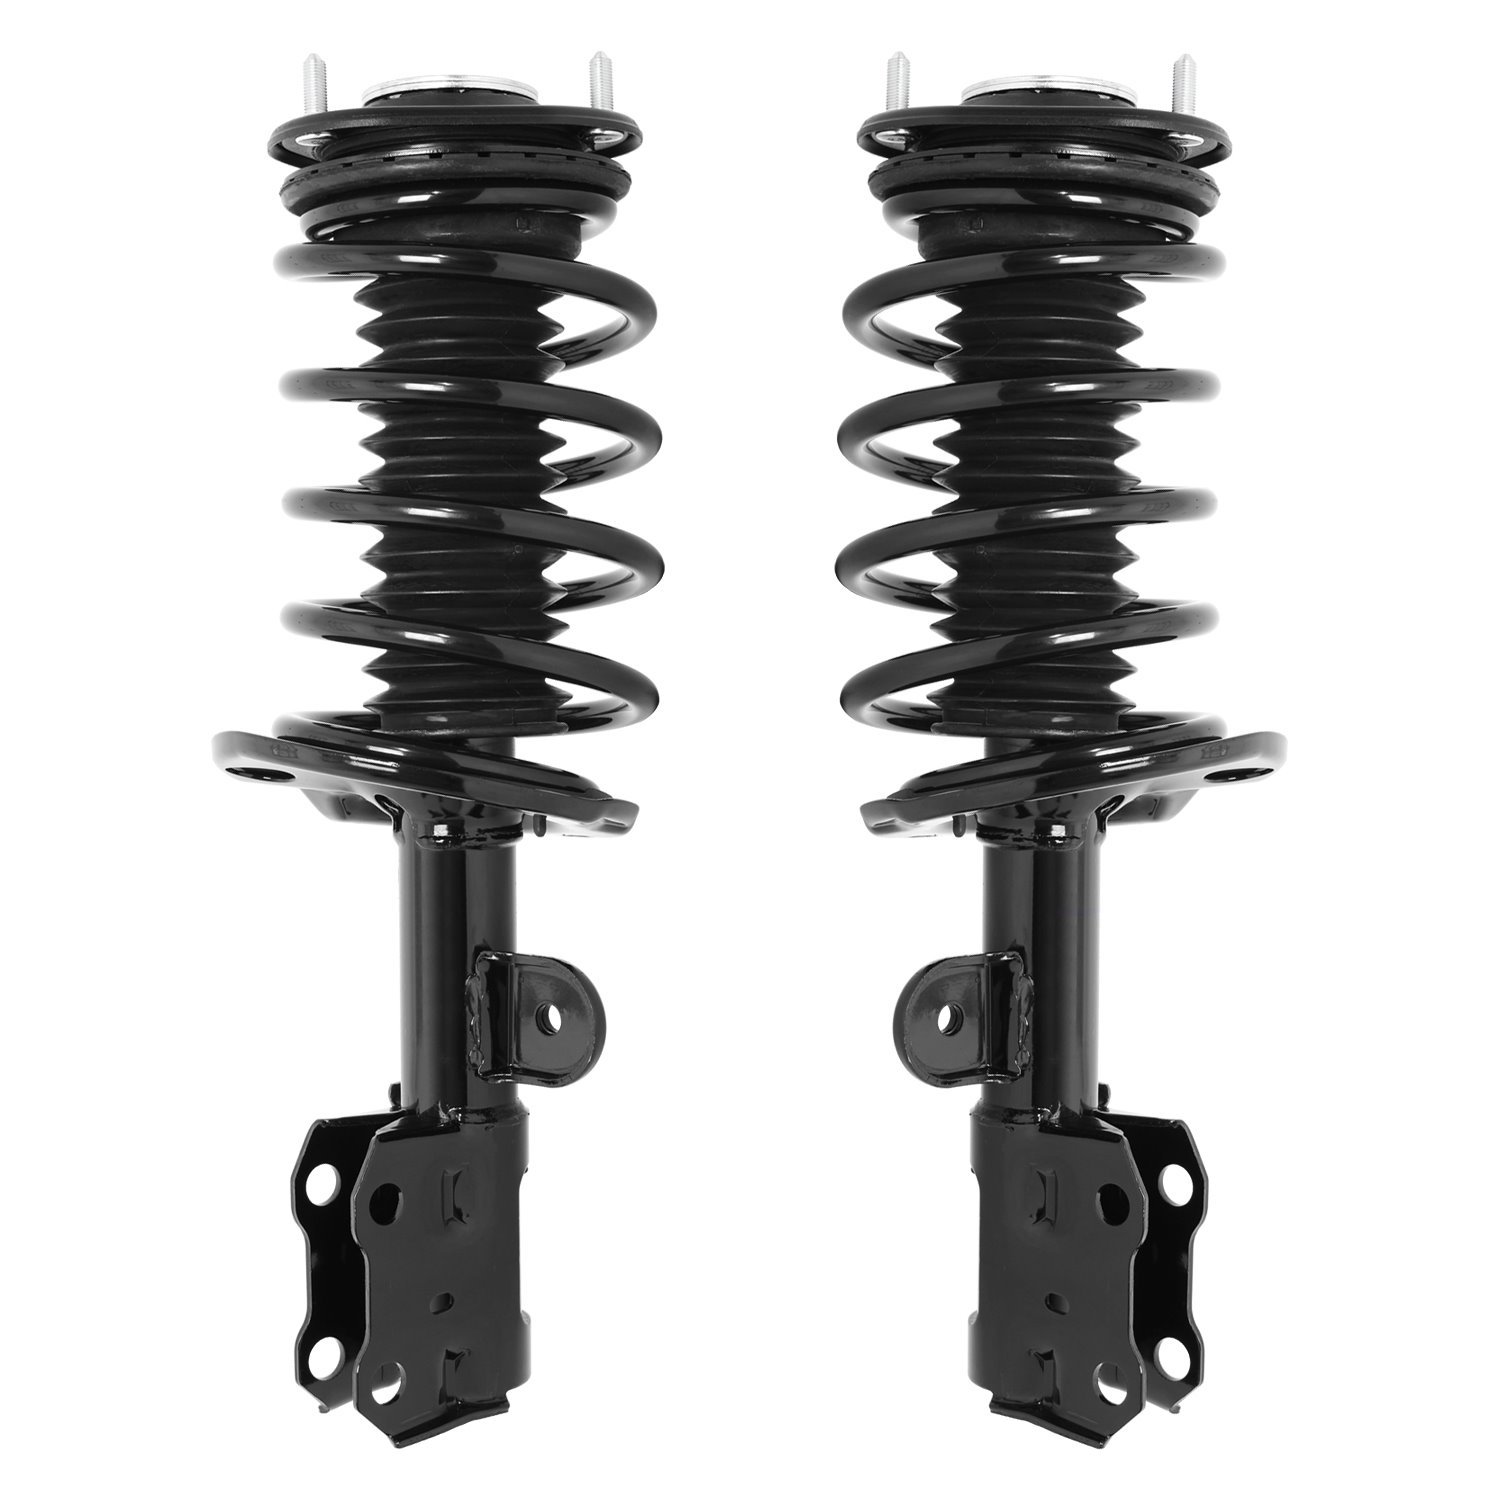 2-11106-11107-001 Suspension Strut & Coil Spring Assembly Set Fits Select Toyota Prius, Toyota Prius Plug-In